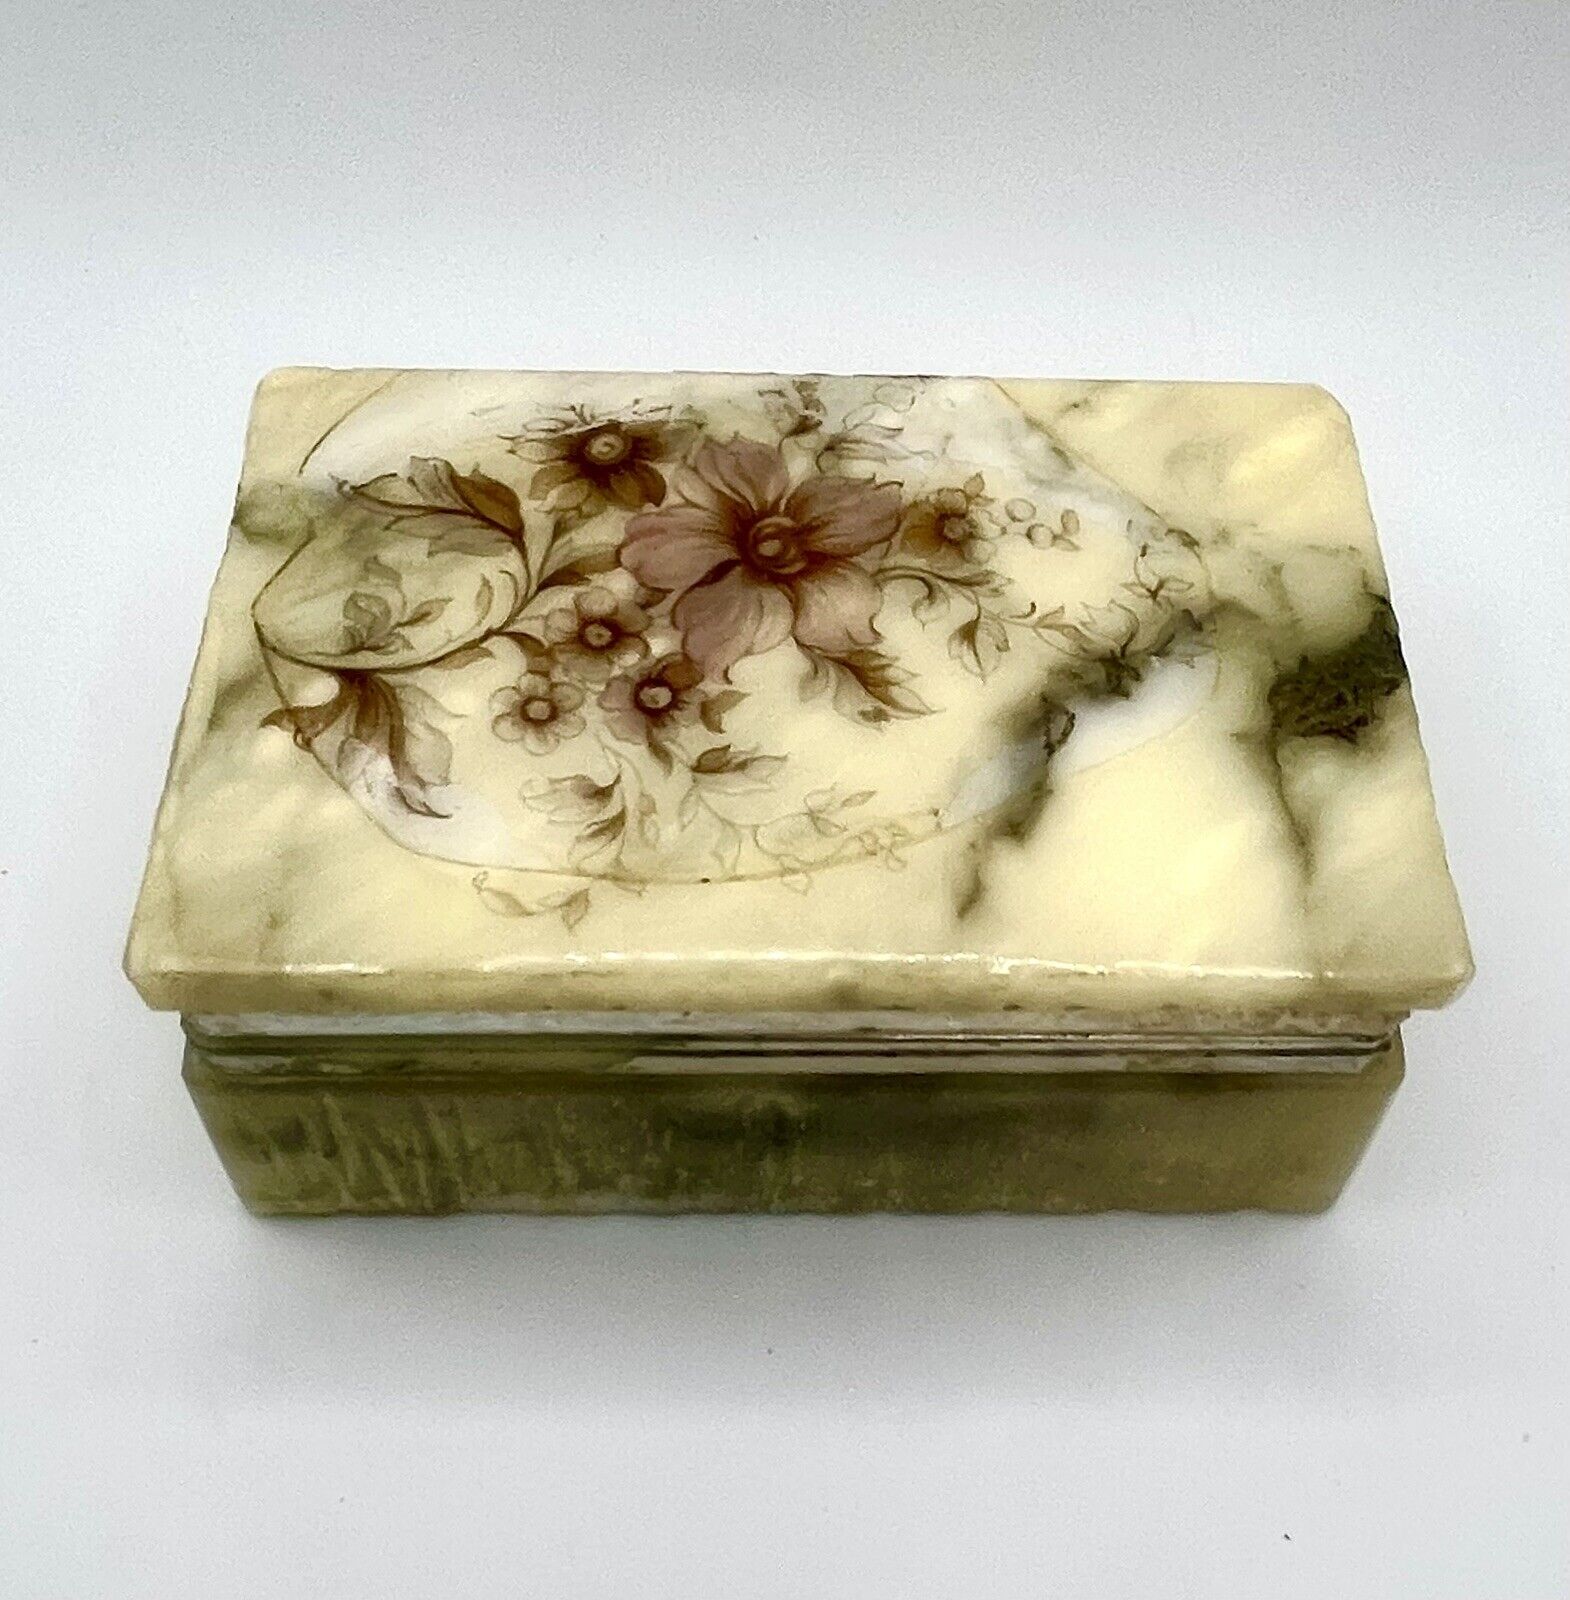 Vintage Genuine Alabaster Hand Carved Hinged Jewelry Trinket Box Made in Italy